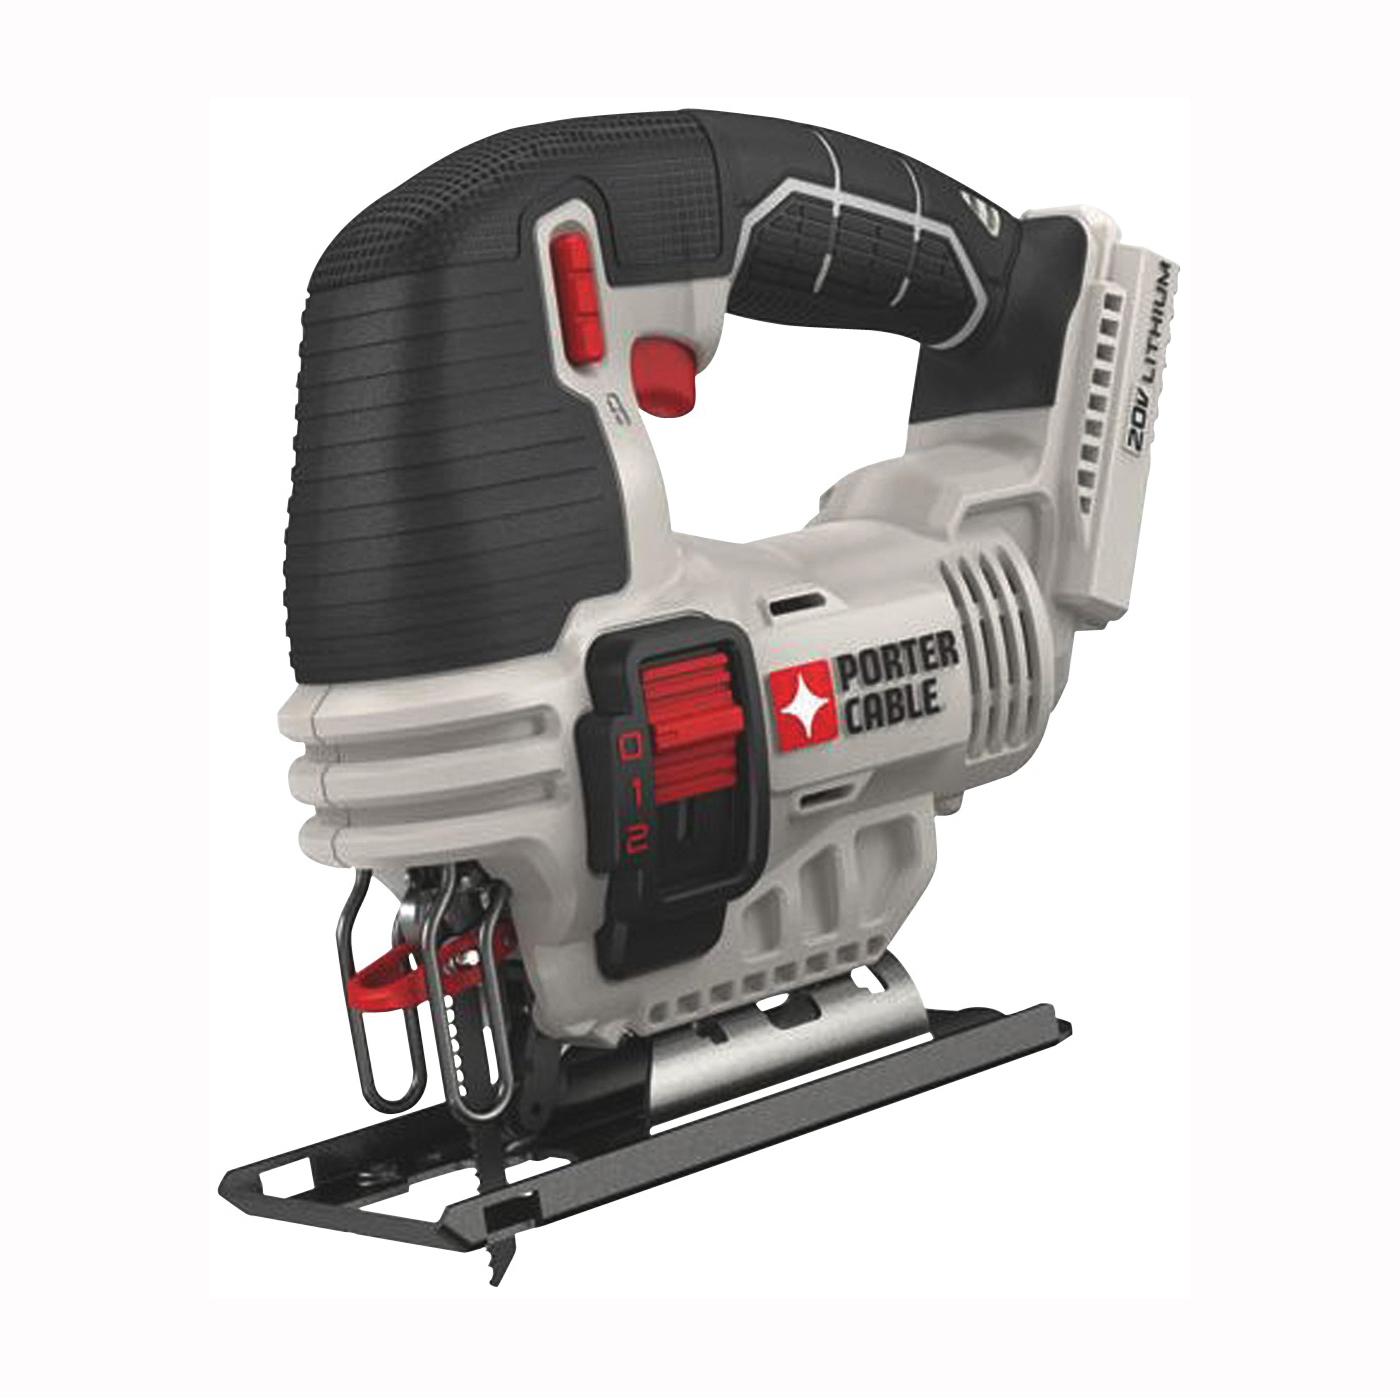 PCC650B Jig Saw, Tool Only, 20 V, 4 Ah, 3/4 in L Stroke, 0 to 2500 spm, Includes: (1) 4 Wood Blade